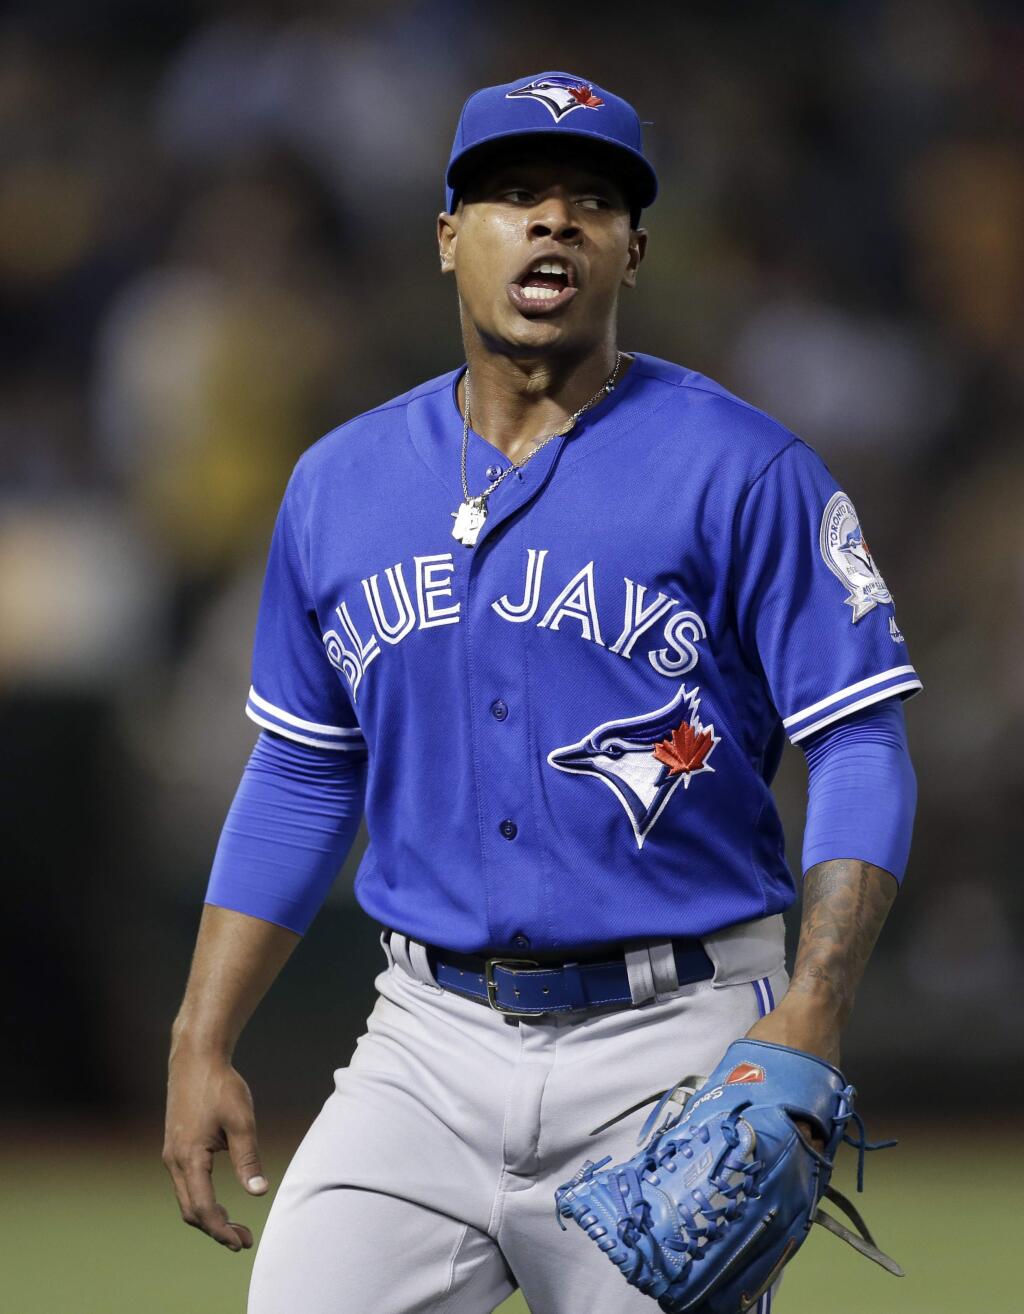 Toronto Blue Jays pitcher Marcus Stroman walks off the field after being removed from the baseball game against the Oakland Athletics during the fifth inning Friday, July 15, 2016, in Oakland, Calif. (AP Photo/Ben Margot)